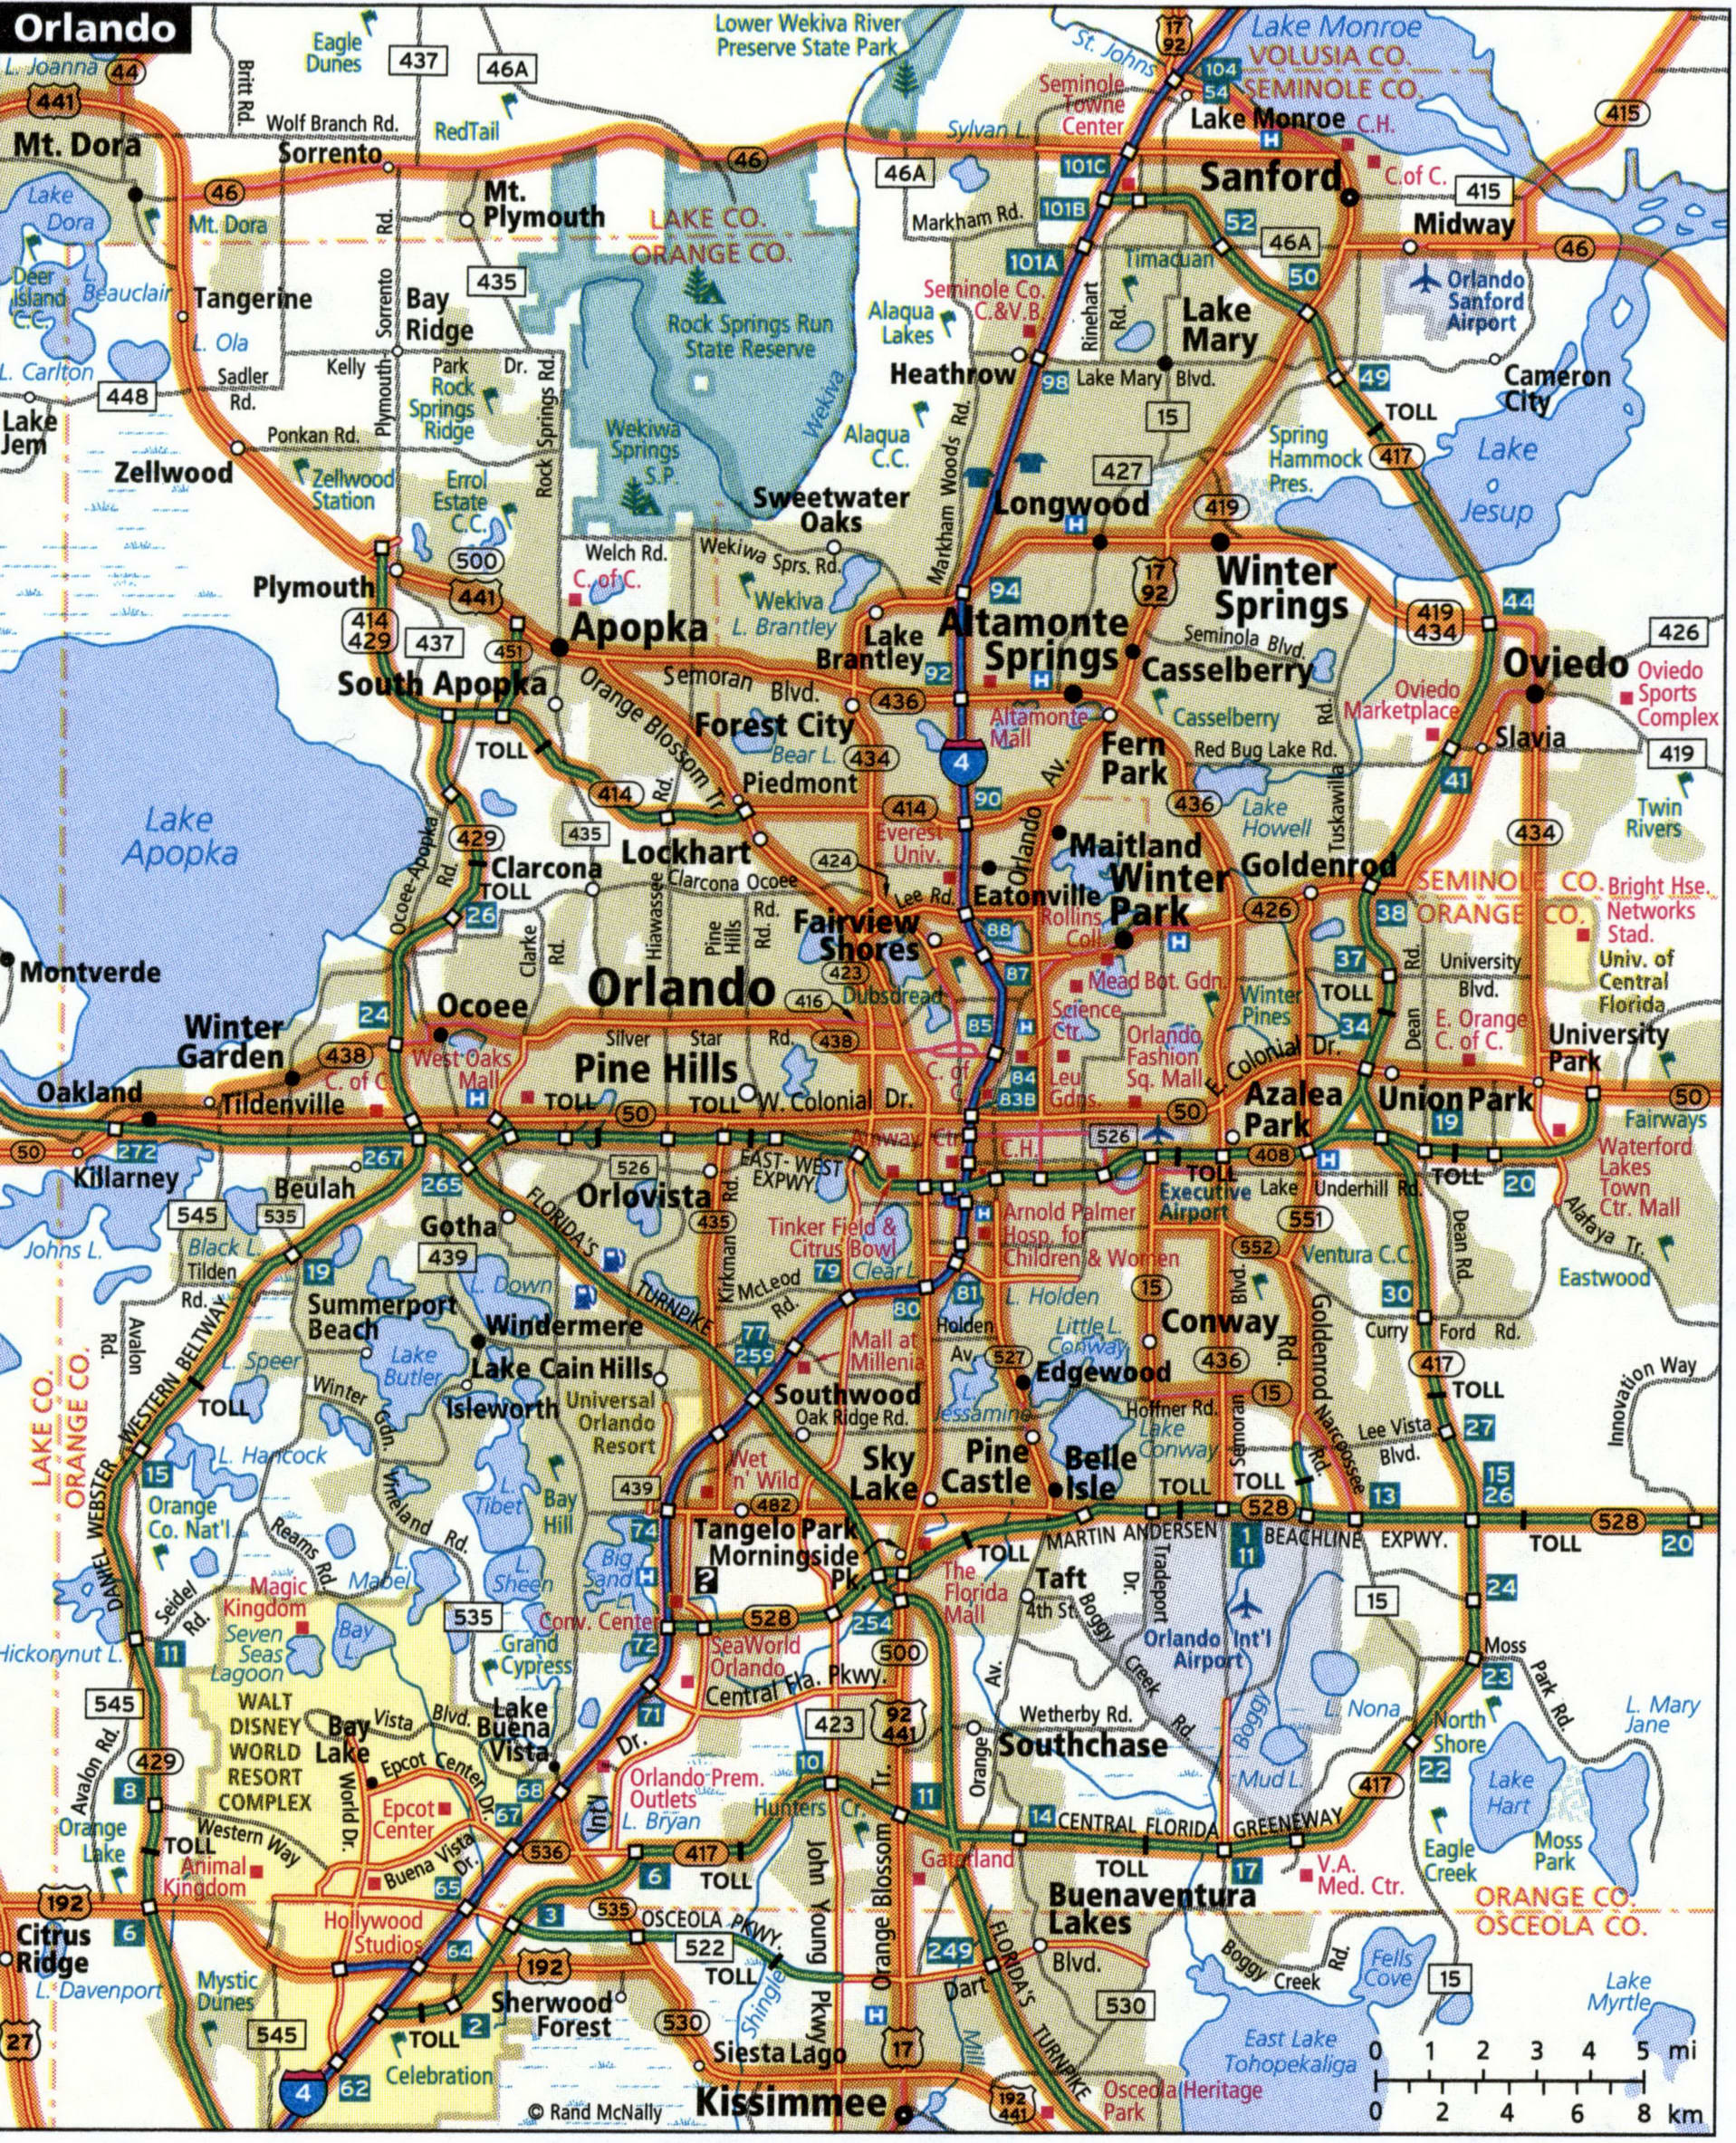 Orlando map for truckers